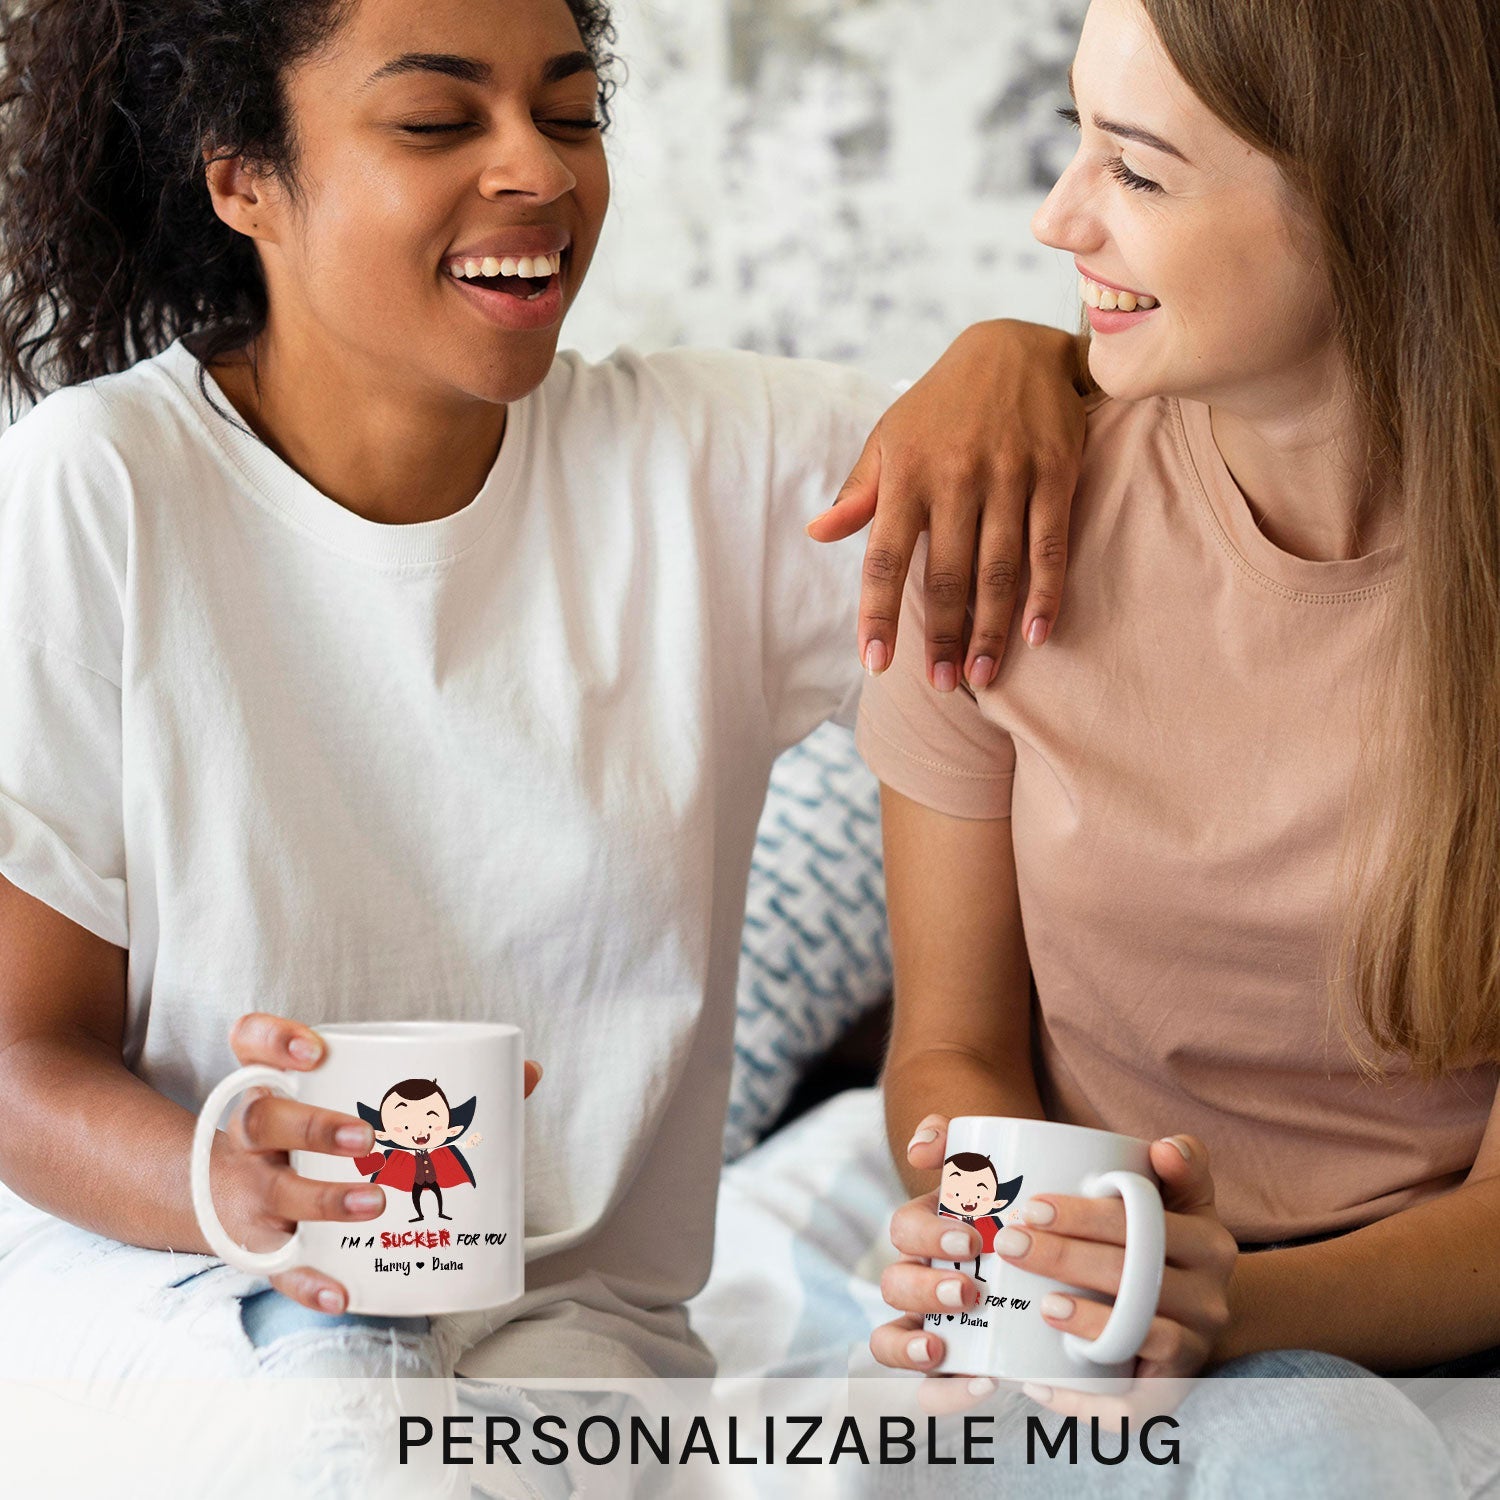 I'm A Sucker For You - Personalized Anniversary or Halloween gift for Boyfriend or Girlfriend - Custom Mug - MyMindfulGifts